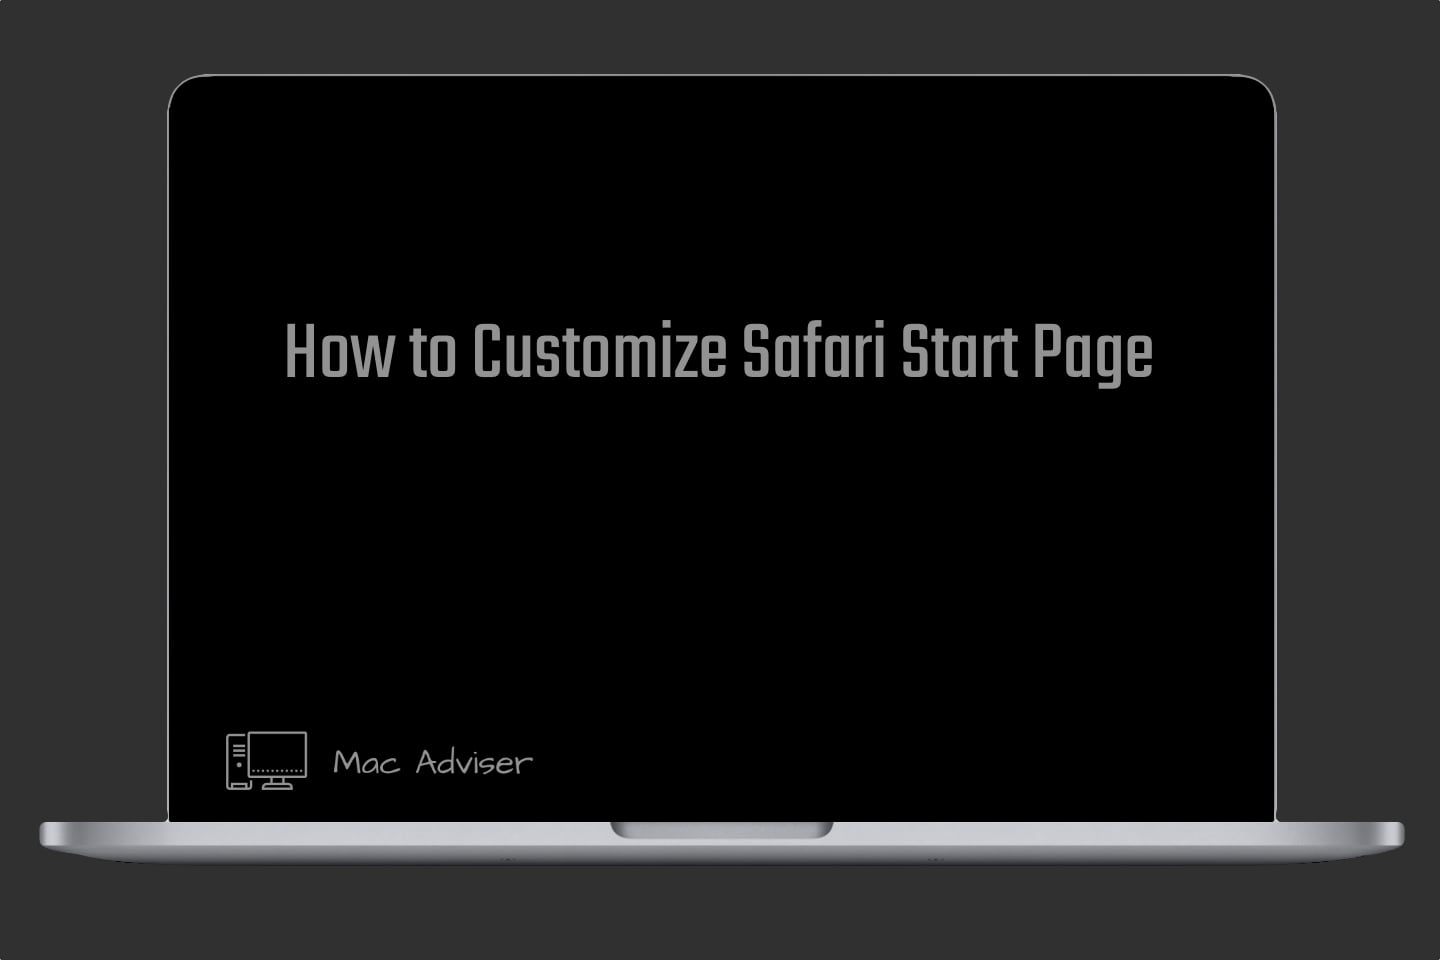 Customize your start page in Safari 5